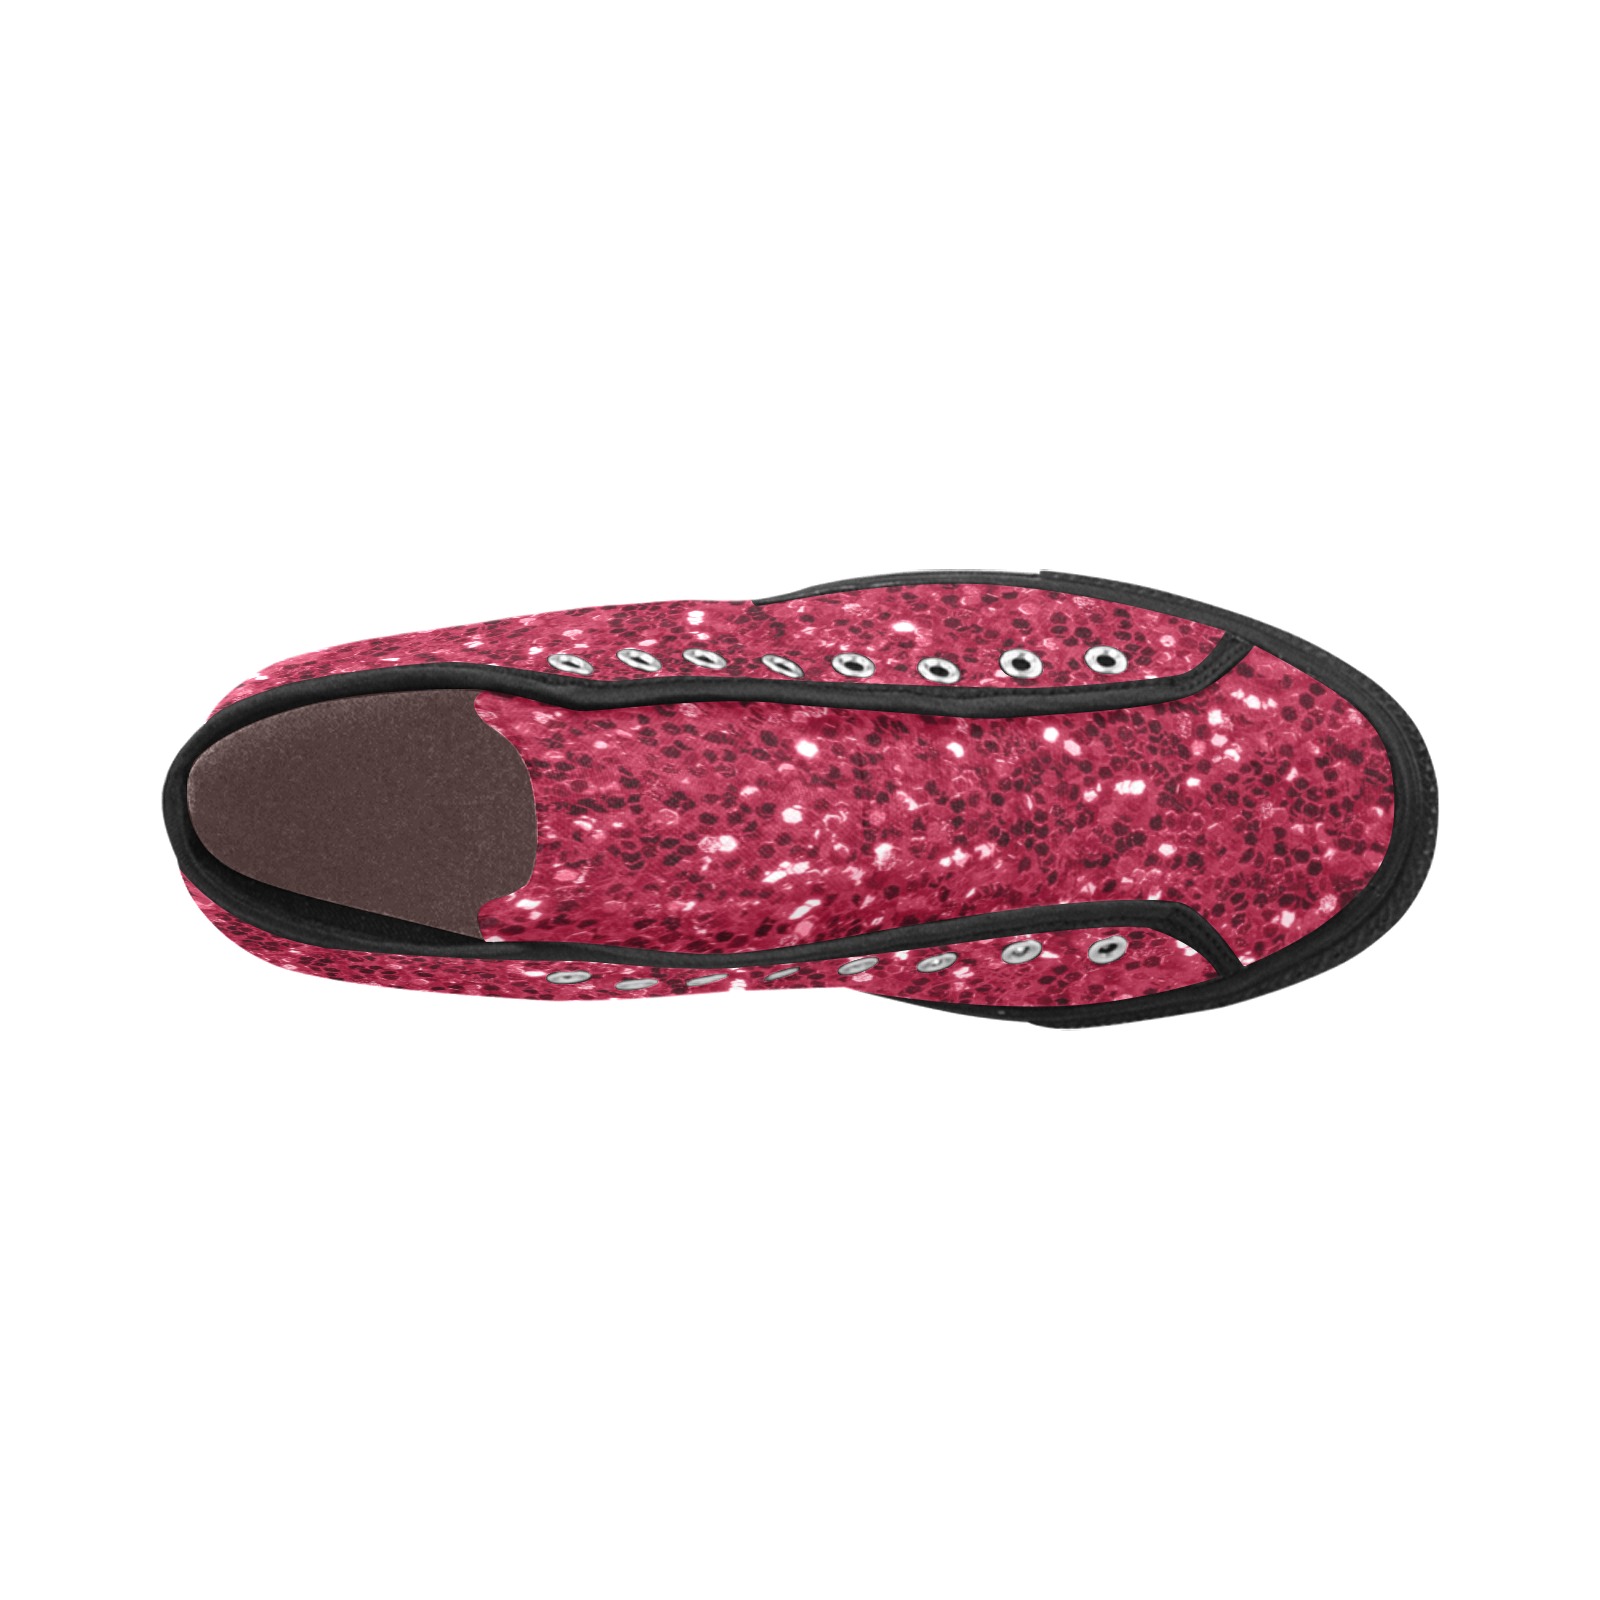 Magenta dark pink red faux sparkles glitter Vancouver H Men's Canvas Shoes (1013-1)